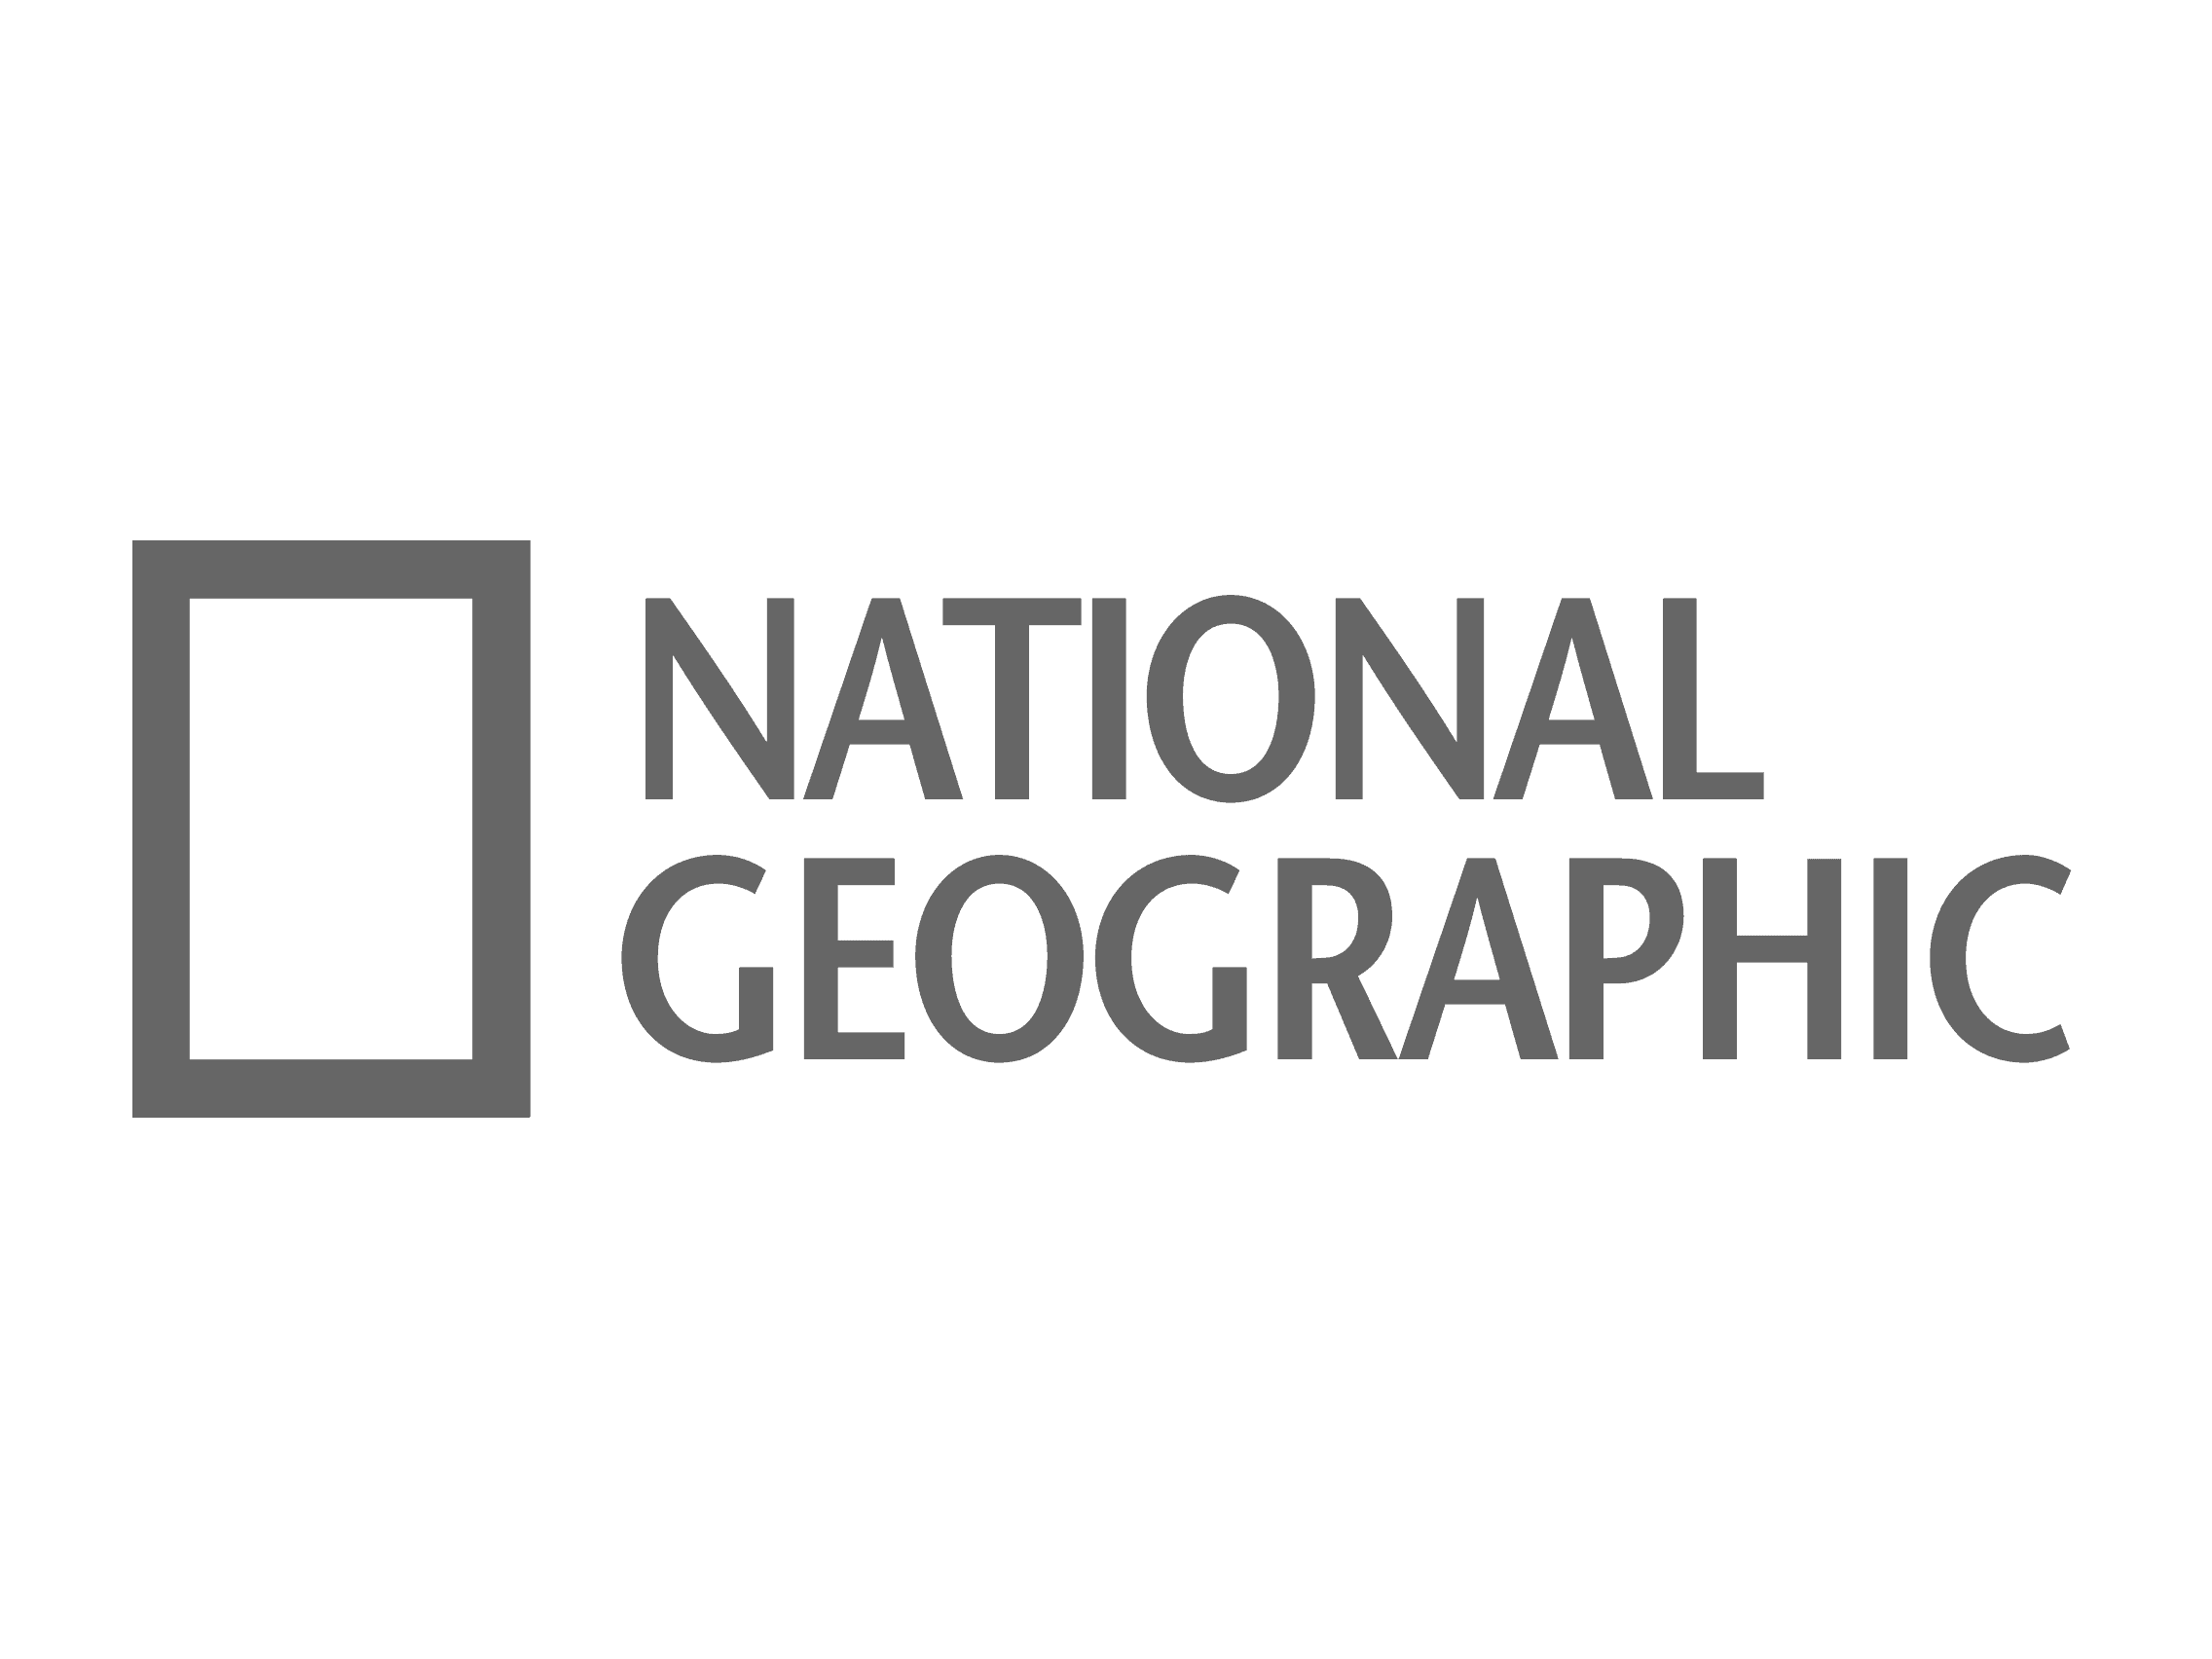 National-Geographic-logo-gray.png